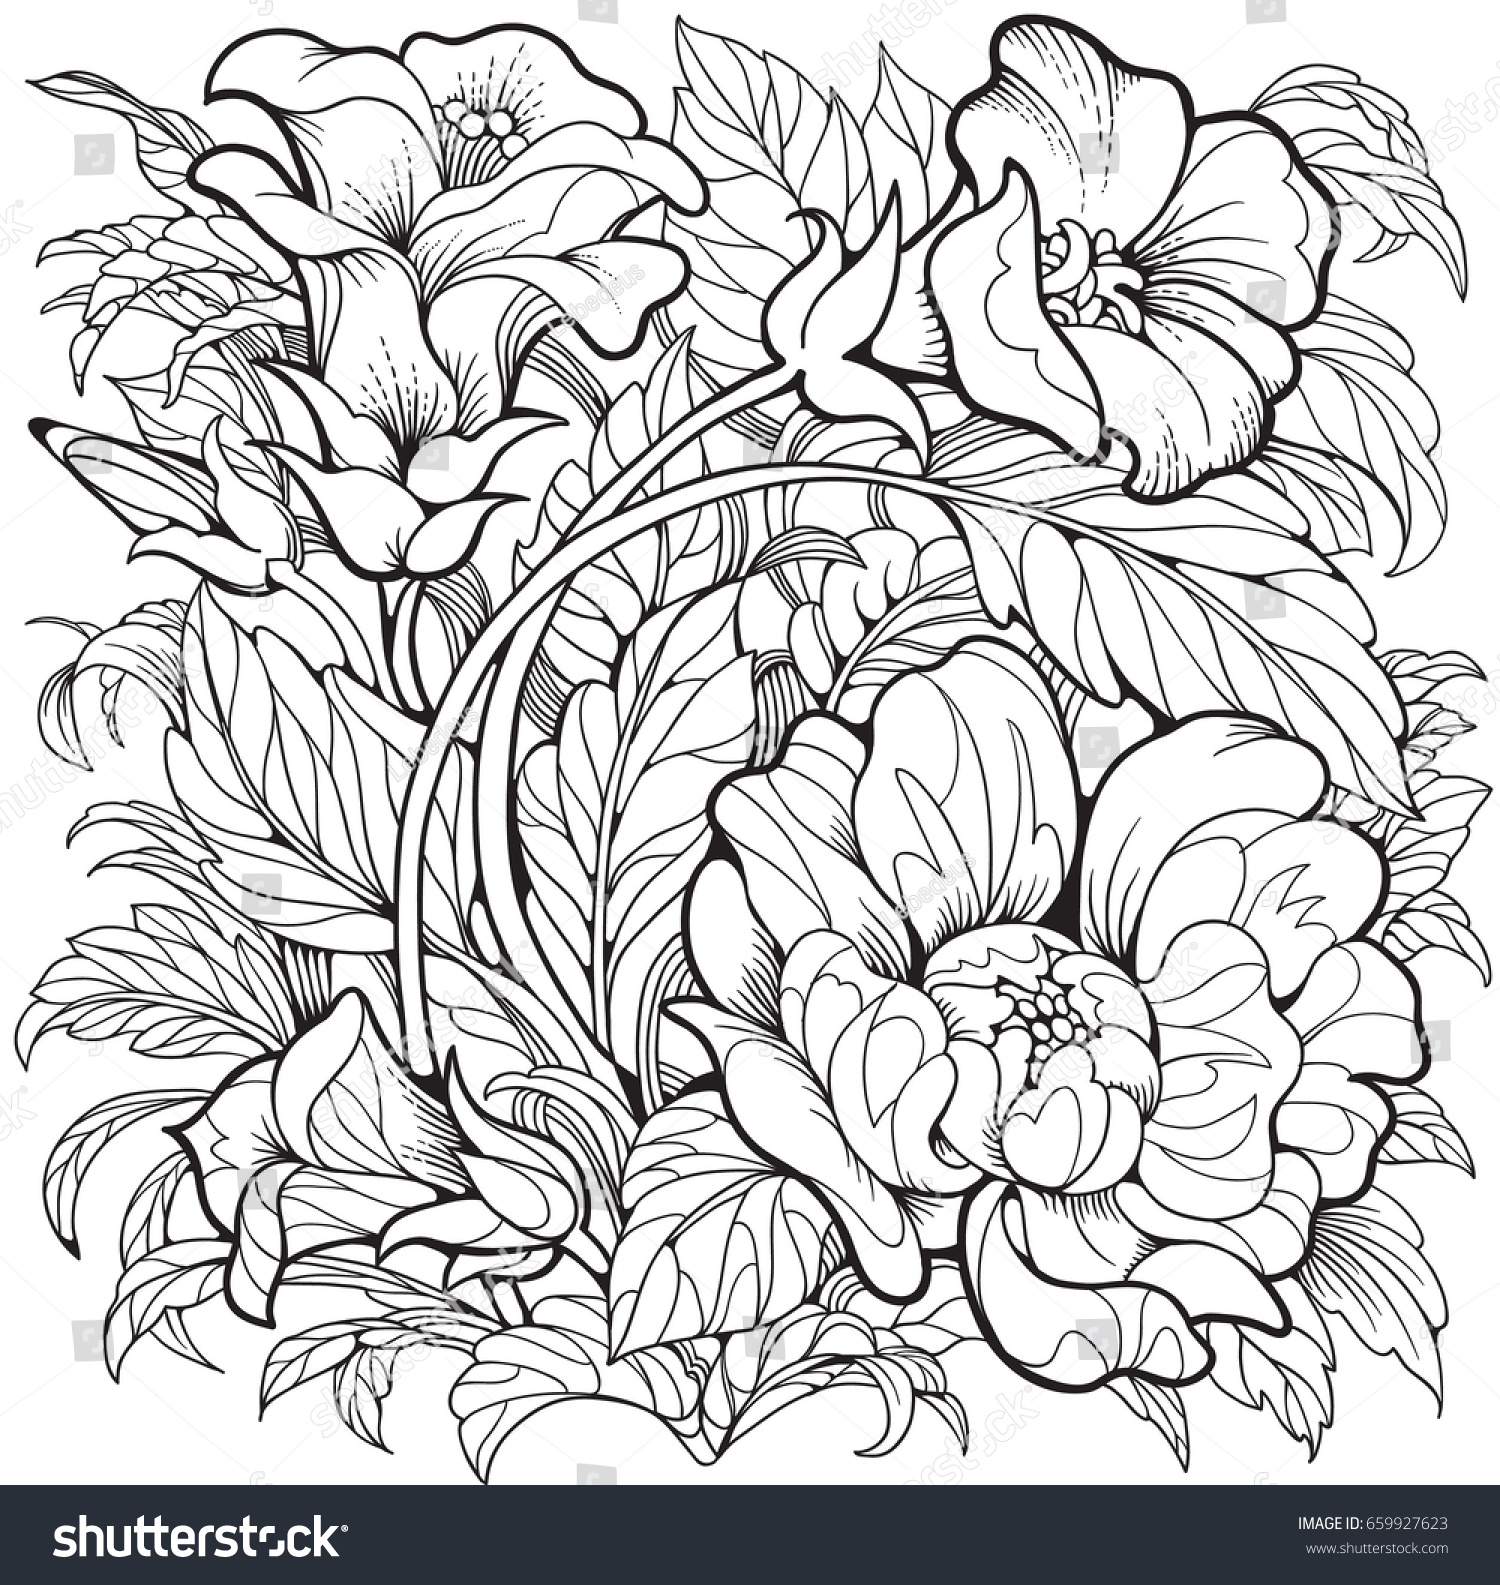 Flowers Coloring Page Line Art Drawing Stock Vector ...